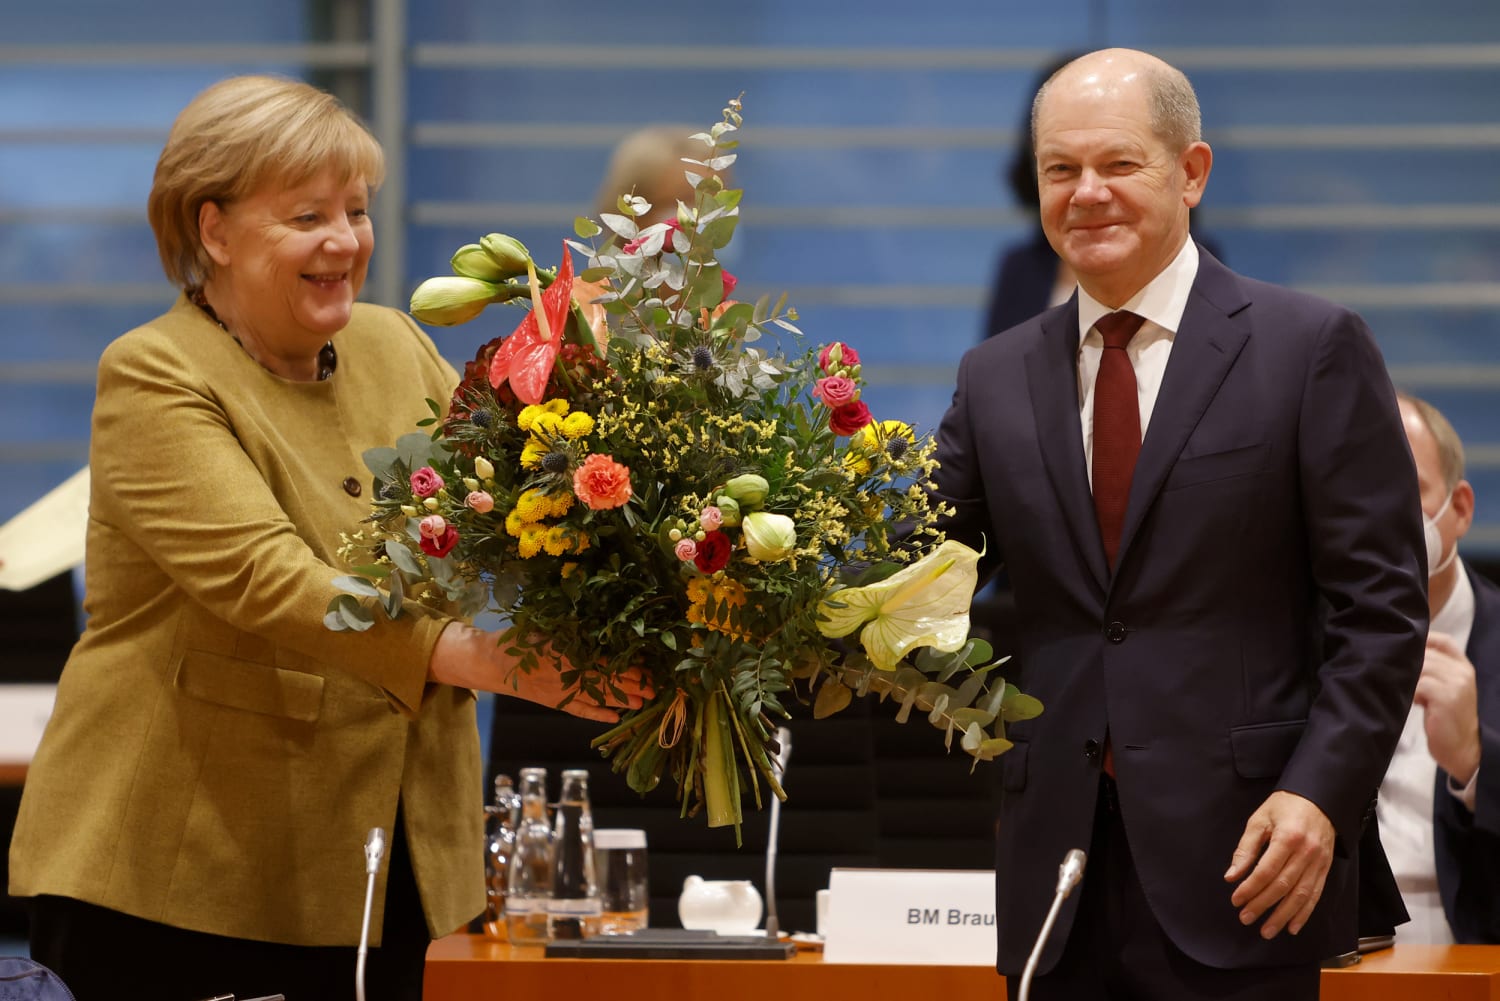 Angela Merkel’s era comes to an end as Olaf Scholz is tapped to run Germany